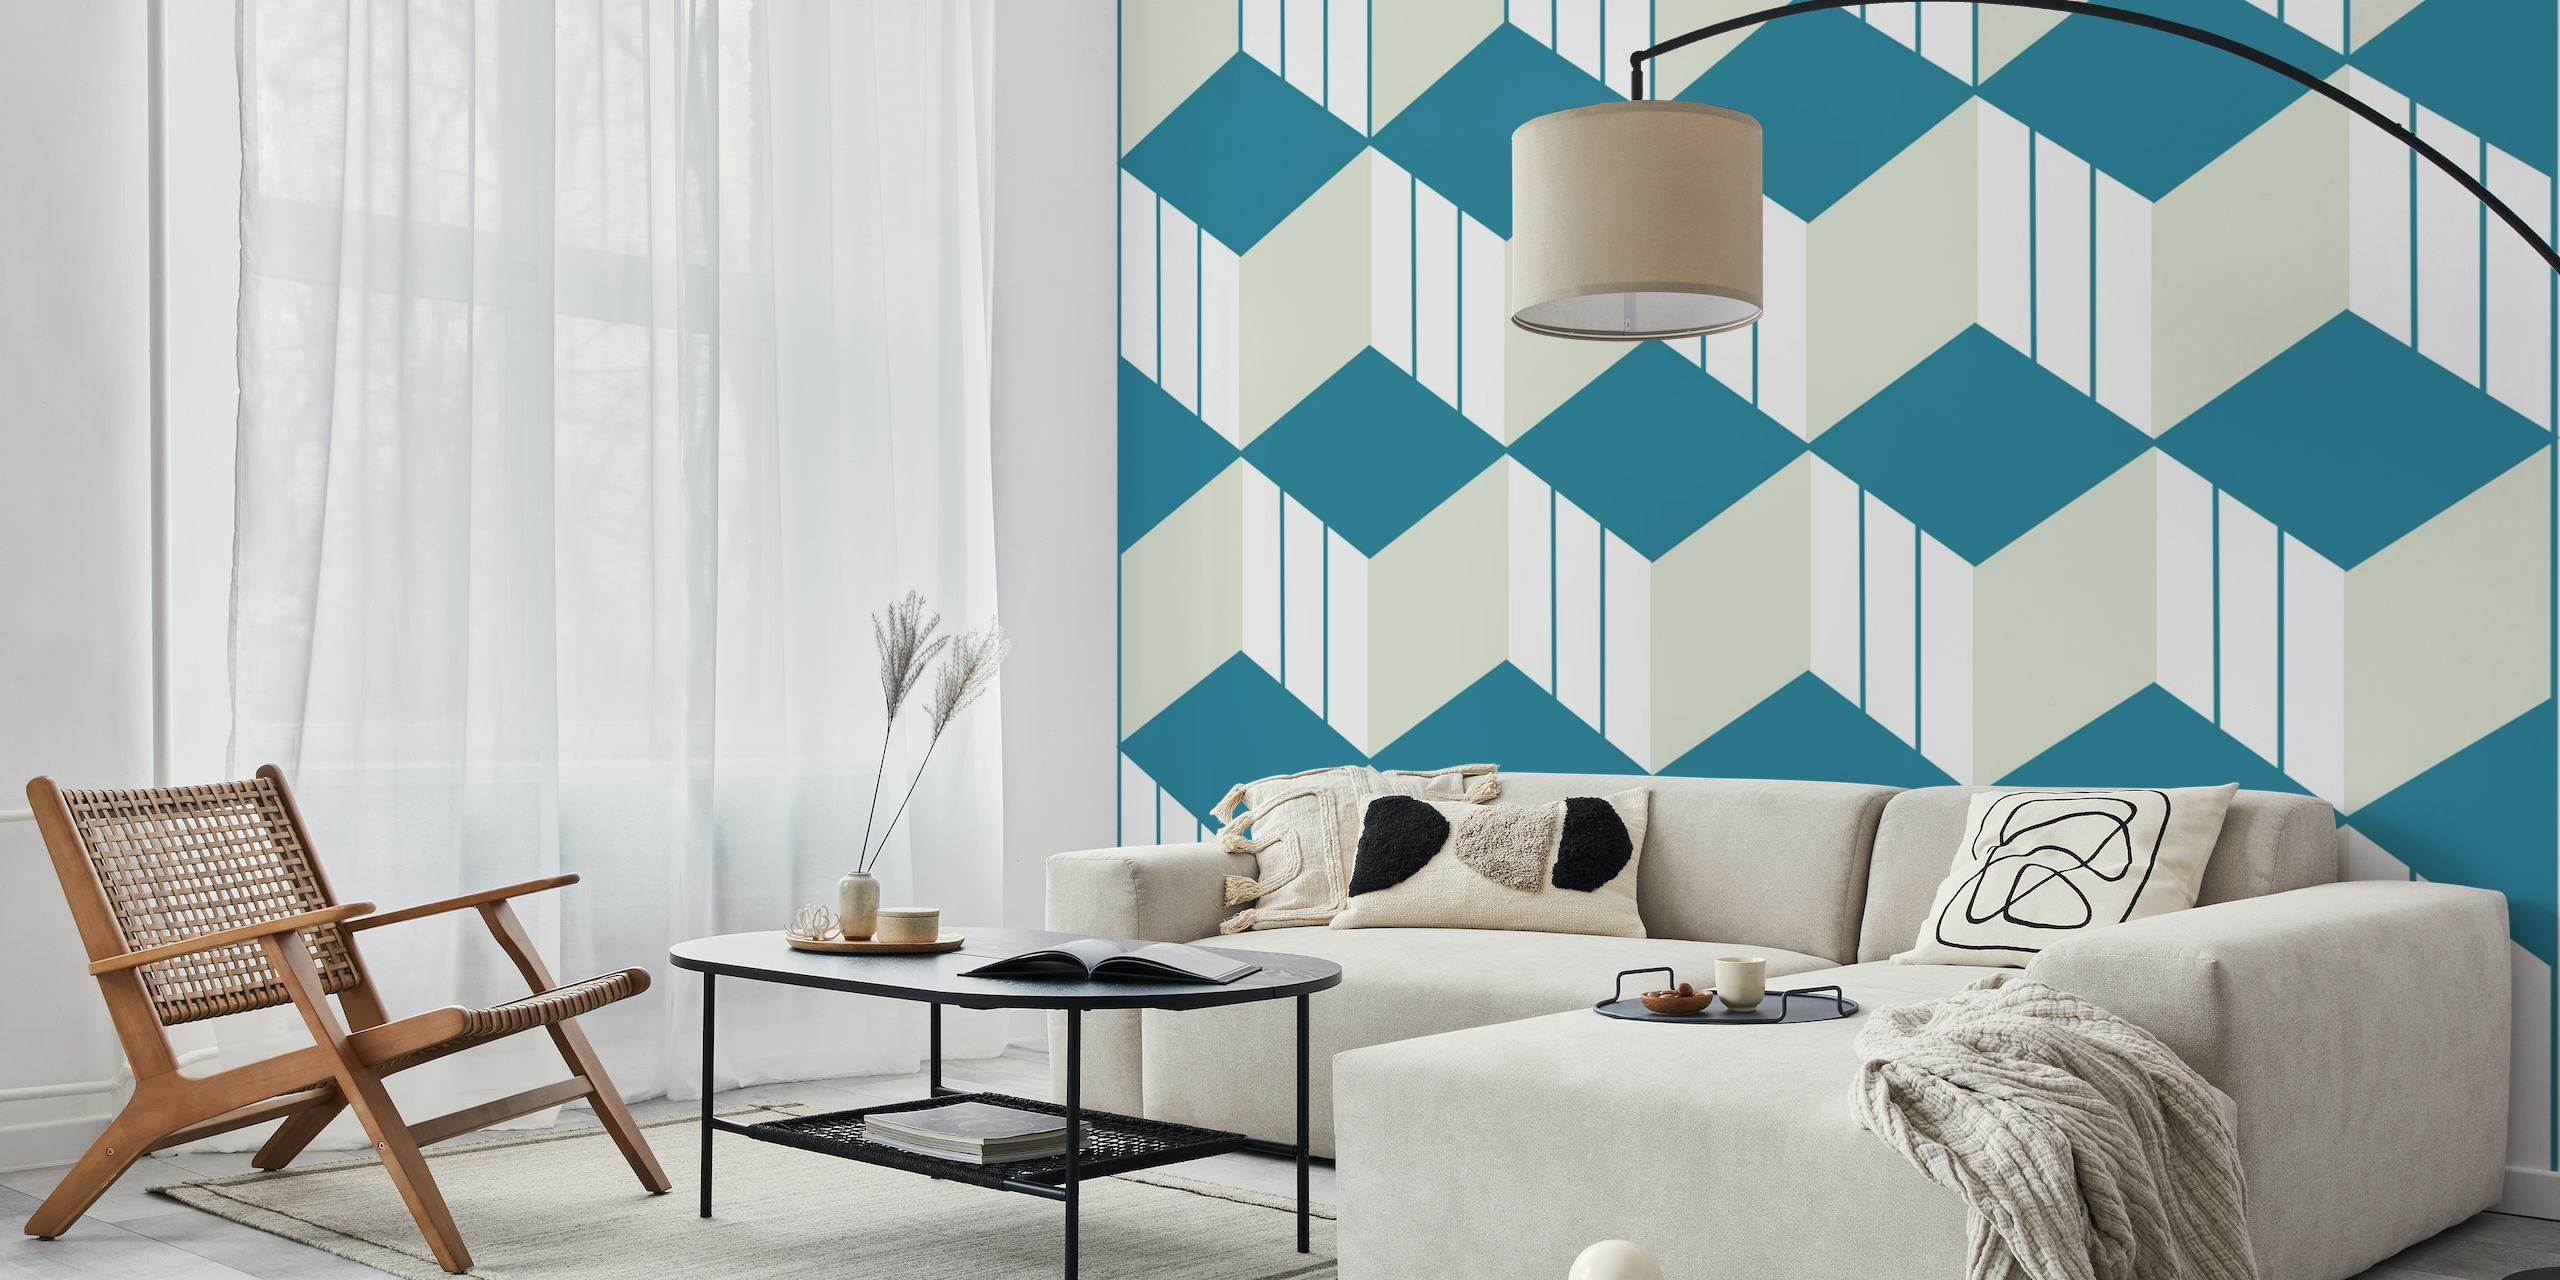 Jade Sage Cube Pattern Wall Mural featuring geometric grid design in calming blues and greens